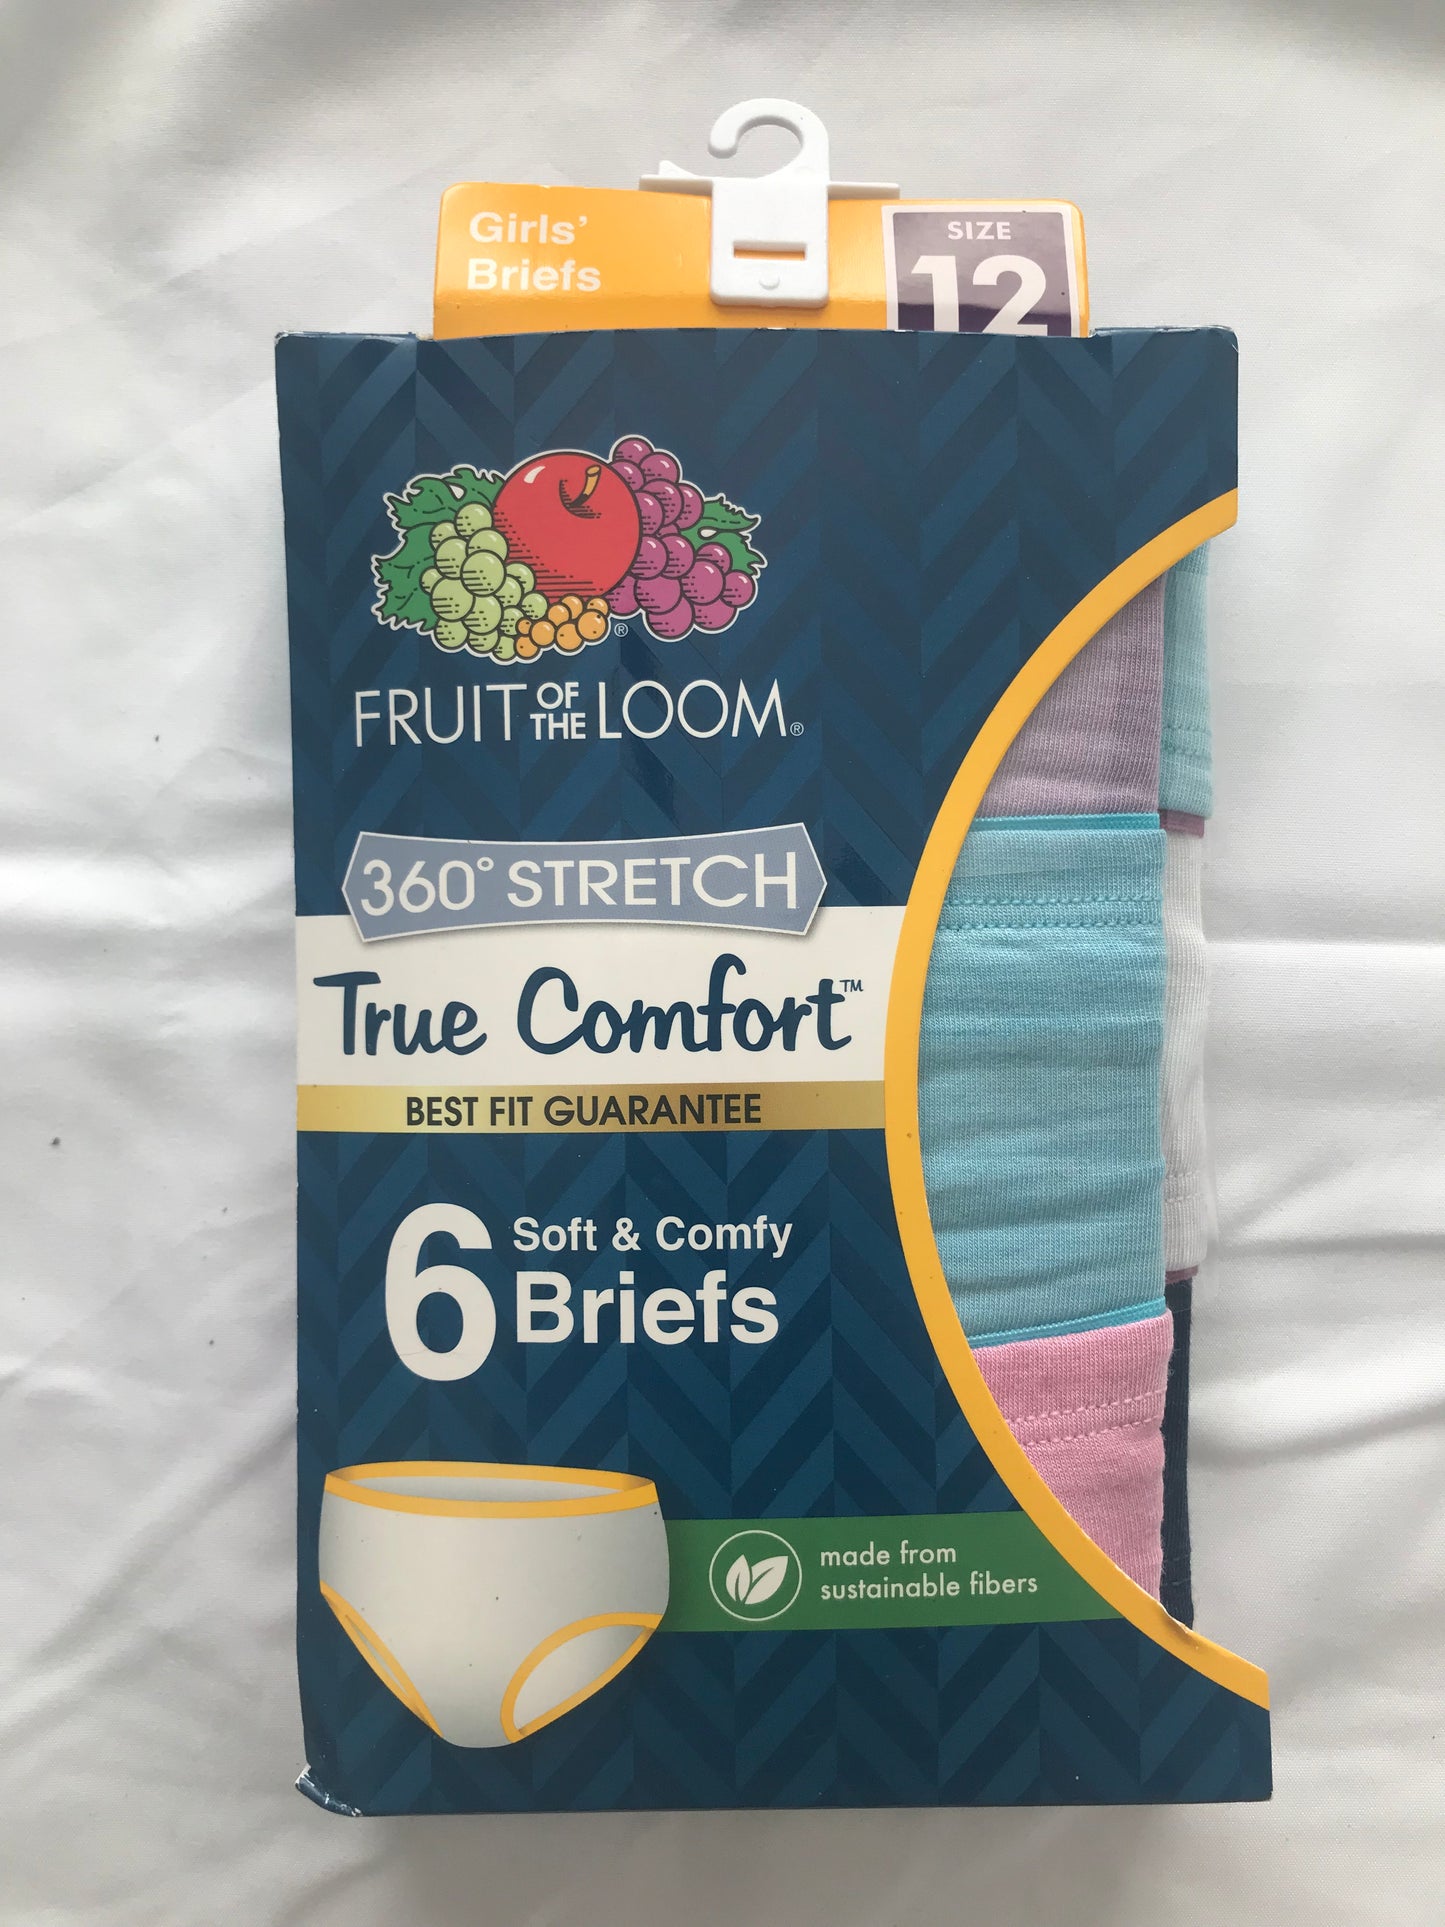 Fruit of the Loom Girls Briefs- Size 12, 6 Pack